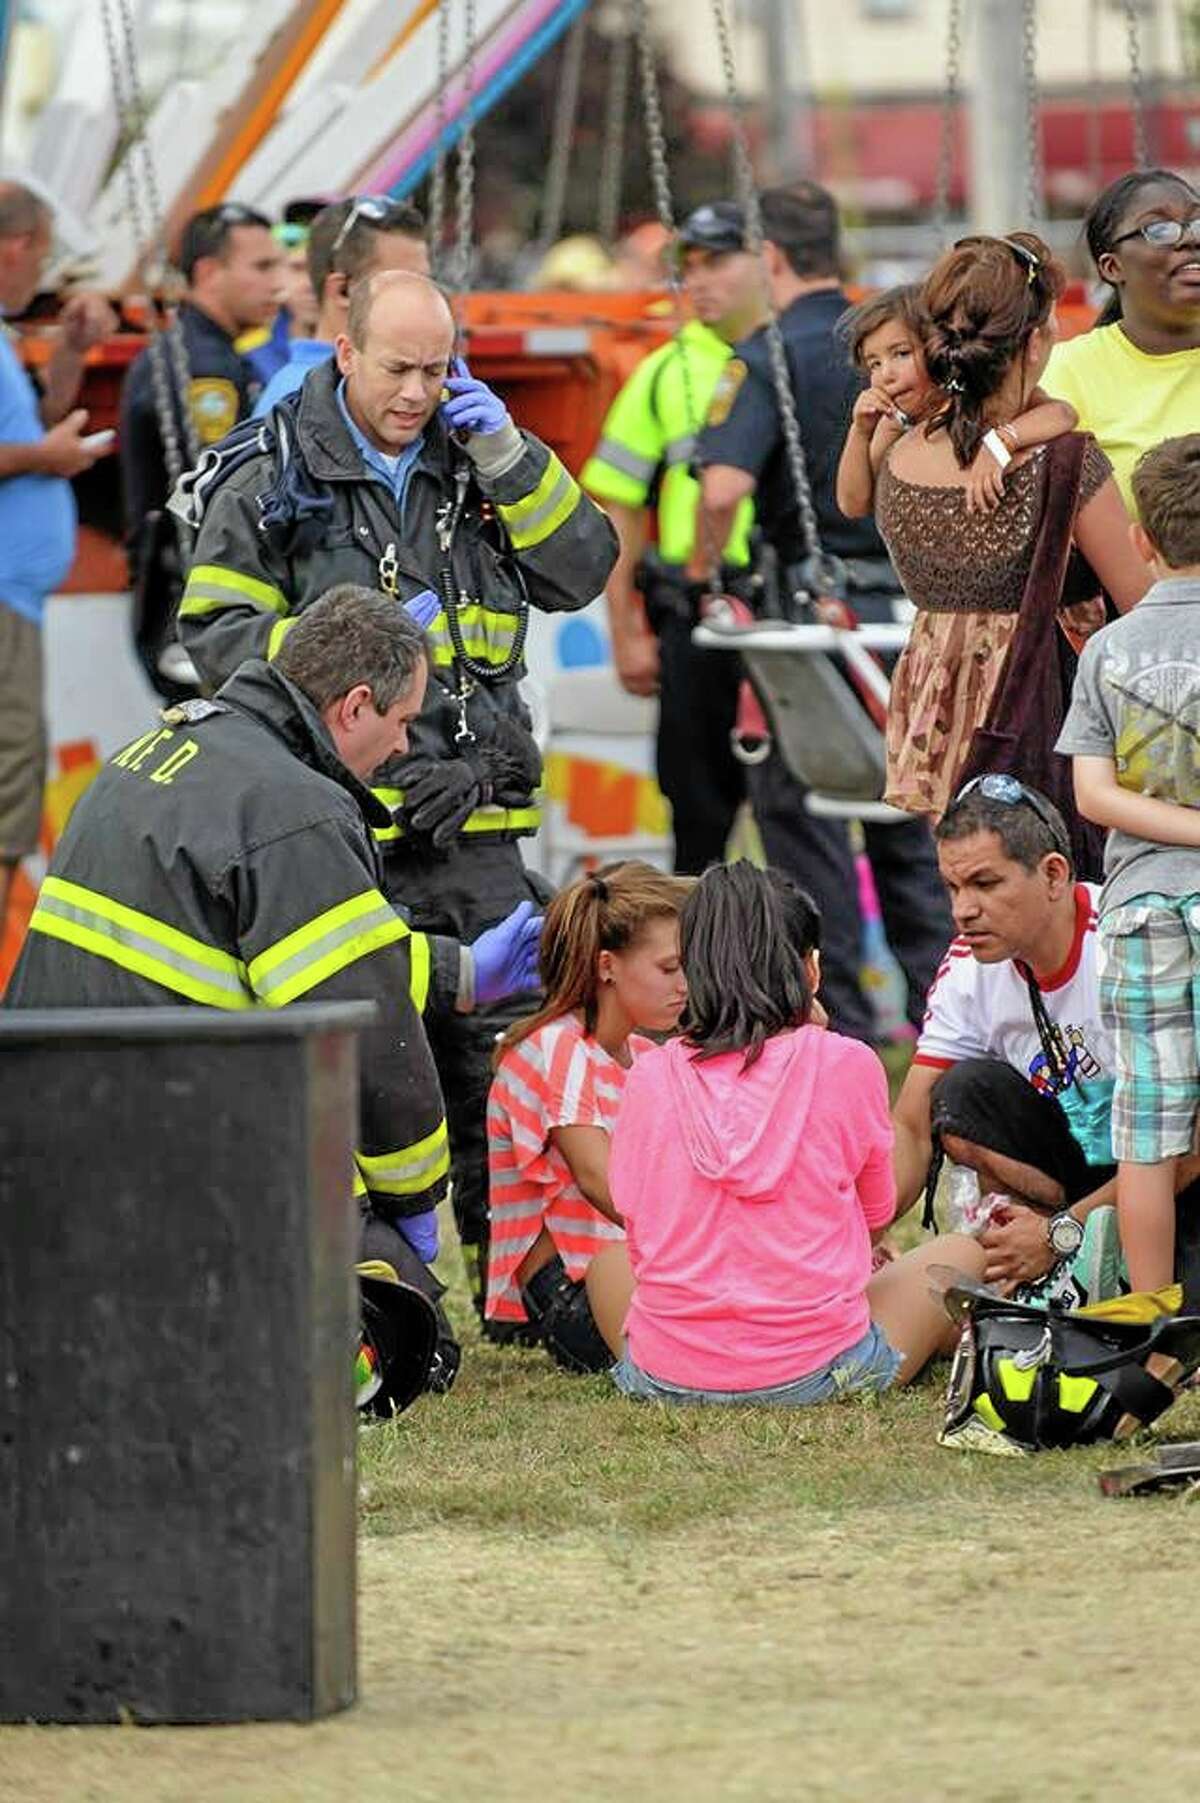 Thirteen children were injured when a festival attraction that swings riders into the air lost power at a community fair in Norwalk, Conn, on Sunday Sept. 8, 2013, but none of the injuries appeared to be life-threatening, authorities said. Most of the children suffered minor injuries and were treated at the Oyster Festival in Norwalk, police said. Norwalk Police Chief Thomas Kulhawik said there were initial reports of serious injuries but preliminary indications are that the injuries were not as severe as first feared. (AP Photo/The Hour Miguel Cruz) MANDATORY CREDIT